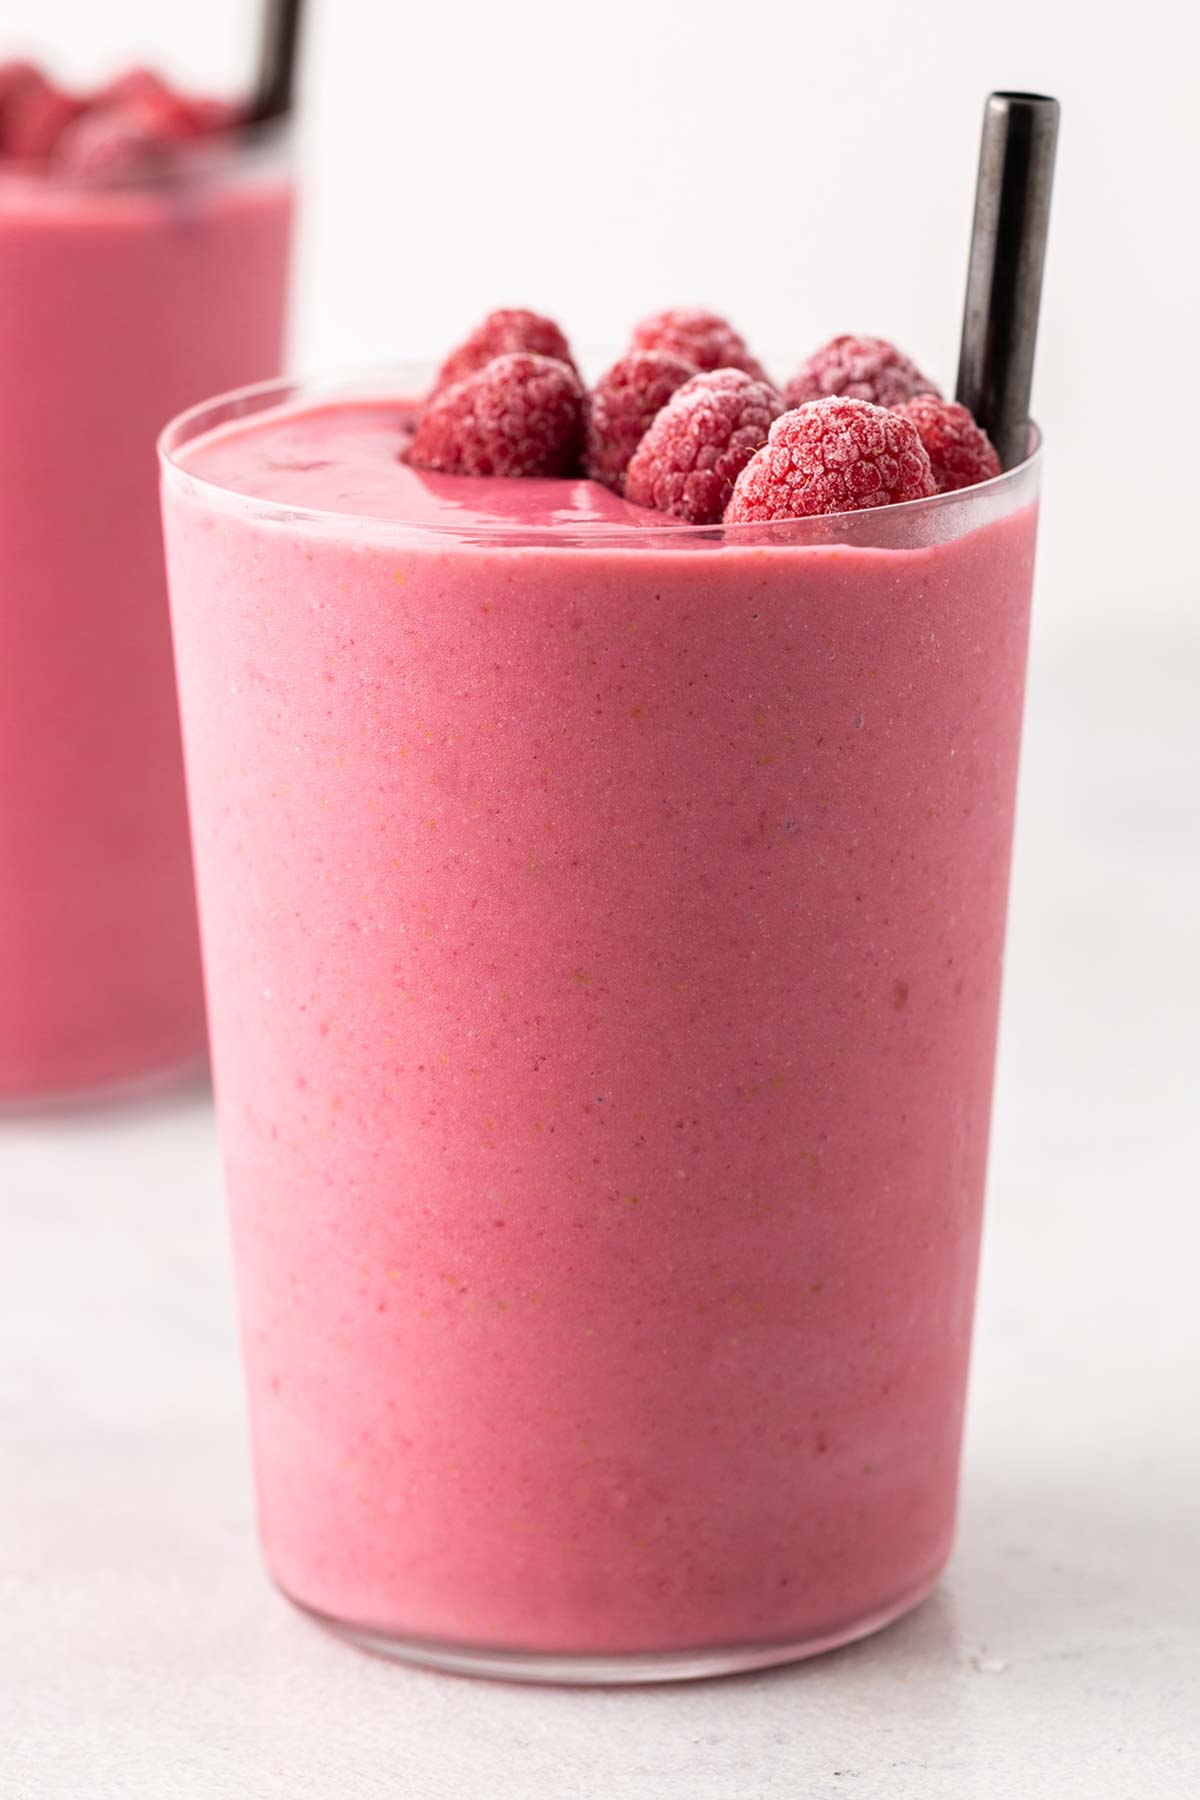 Raspberry smoothie in a glass.